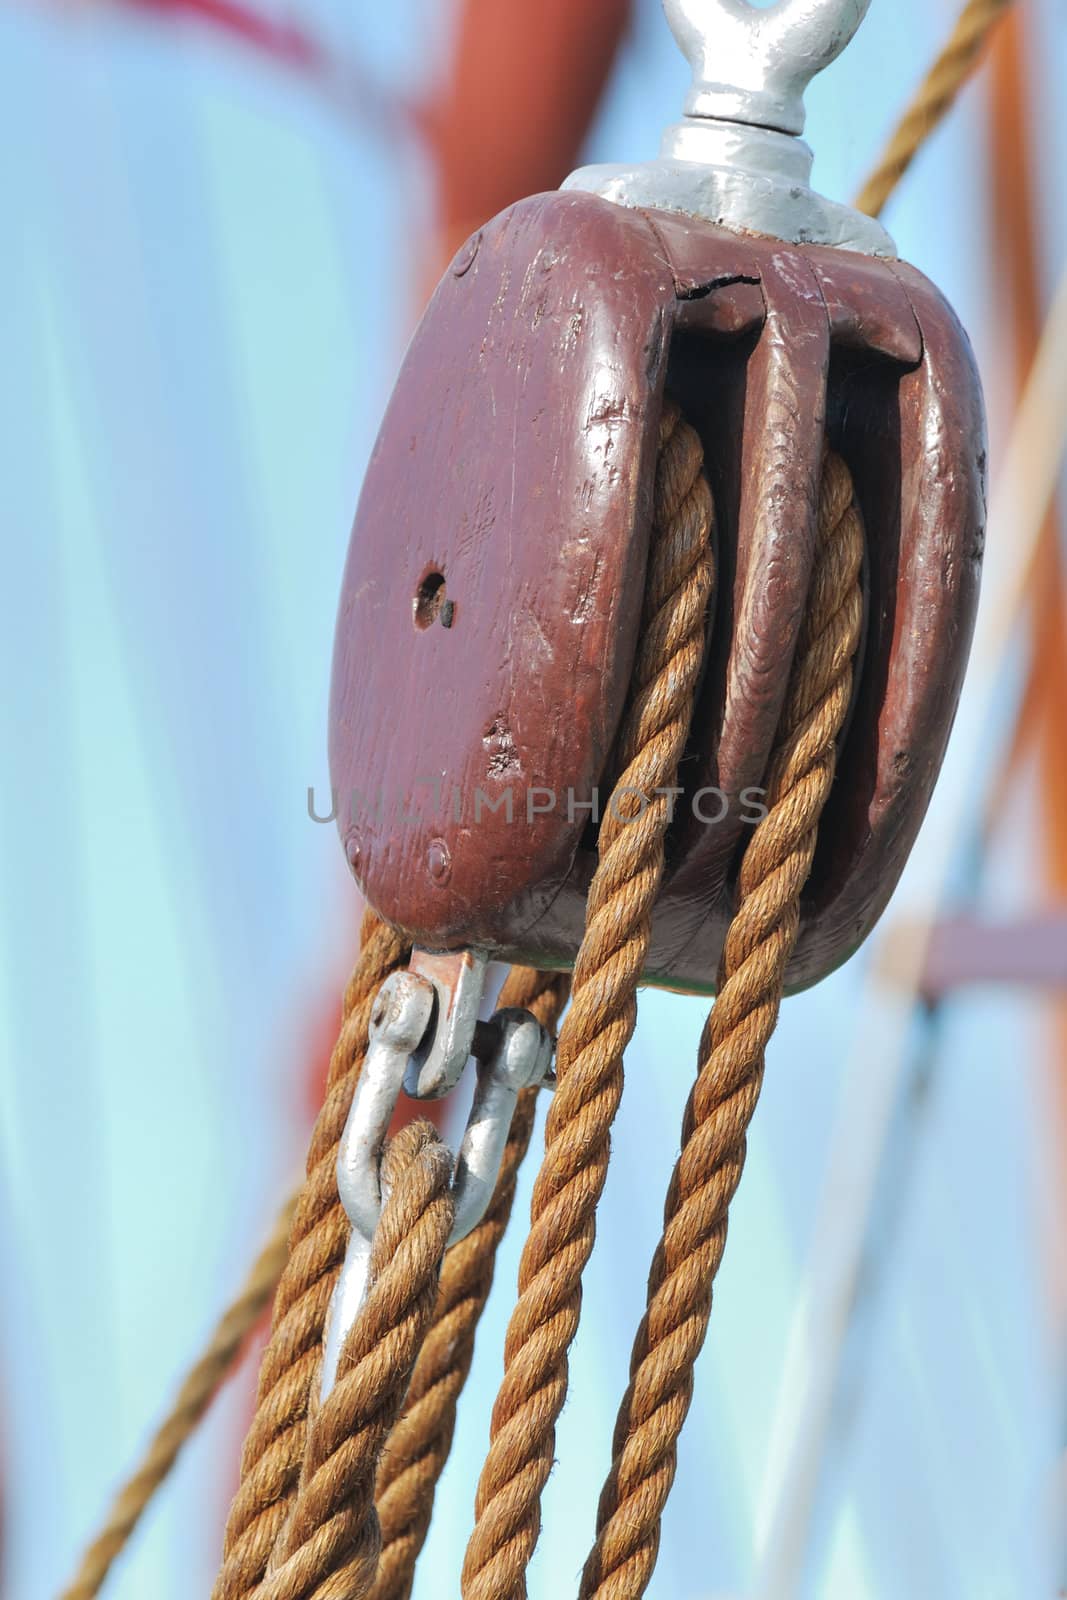 Sailing Pulley by pauws99